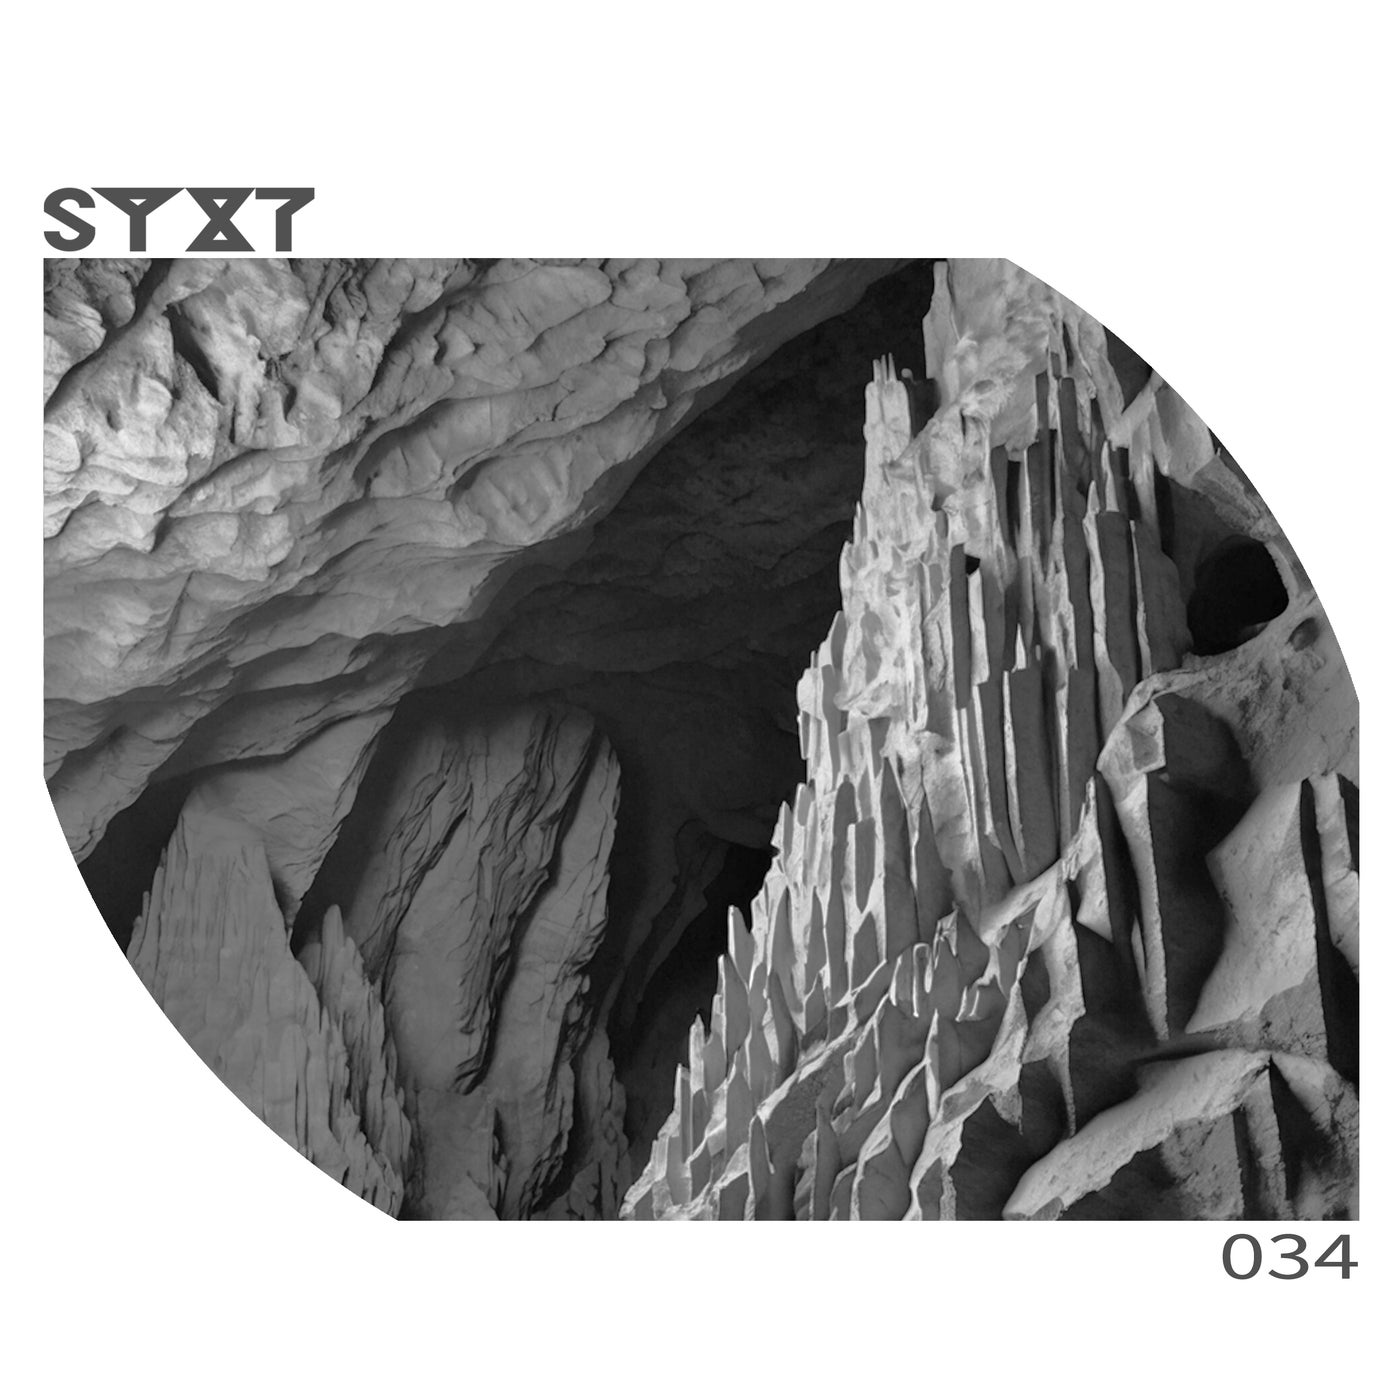 Syxt034